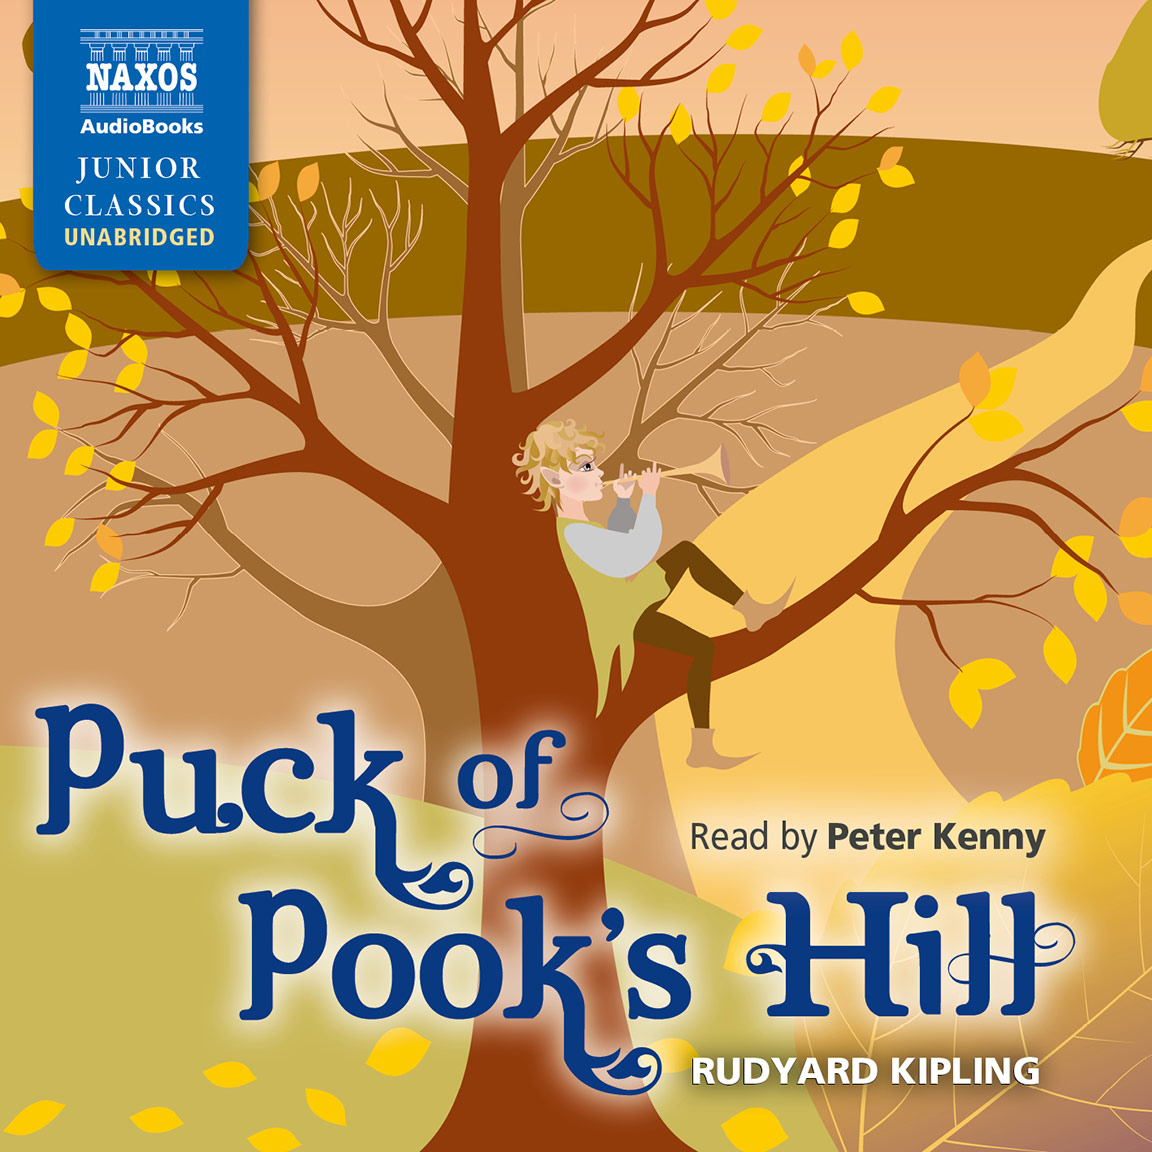 Puck of Pook’s Hill (unabridged)